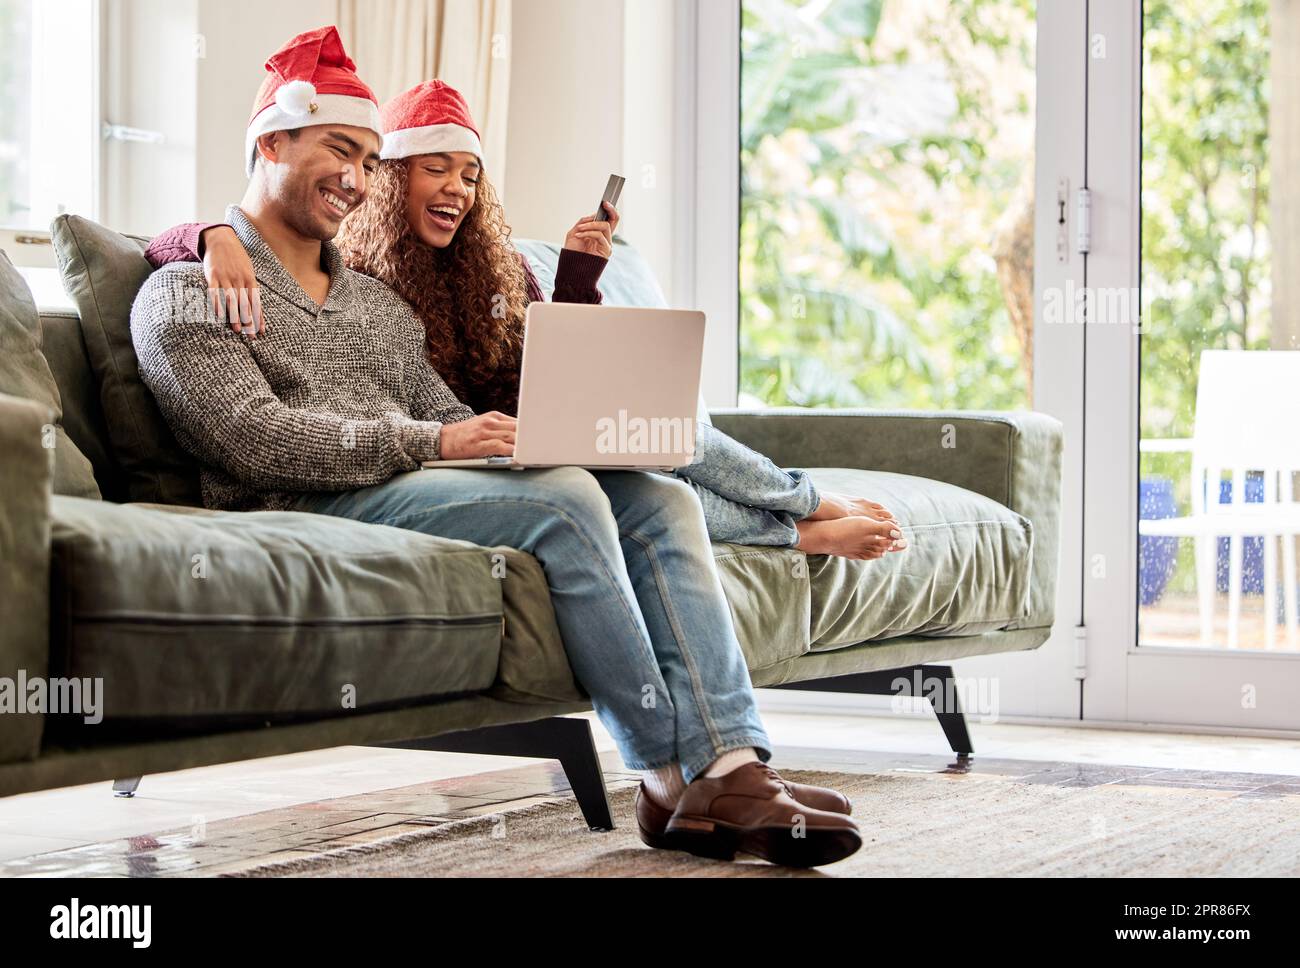 Were doing all our Christmas shopping online. Shot of a young couple doing online shopping while wearing Christmas hats at home. Stock Photo